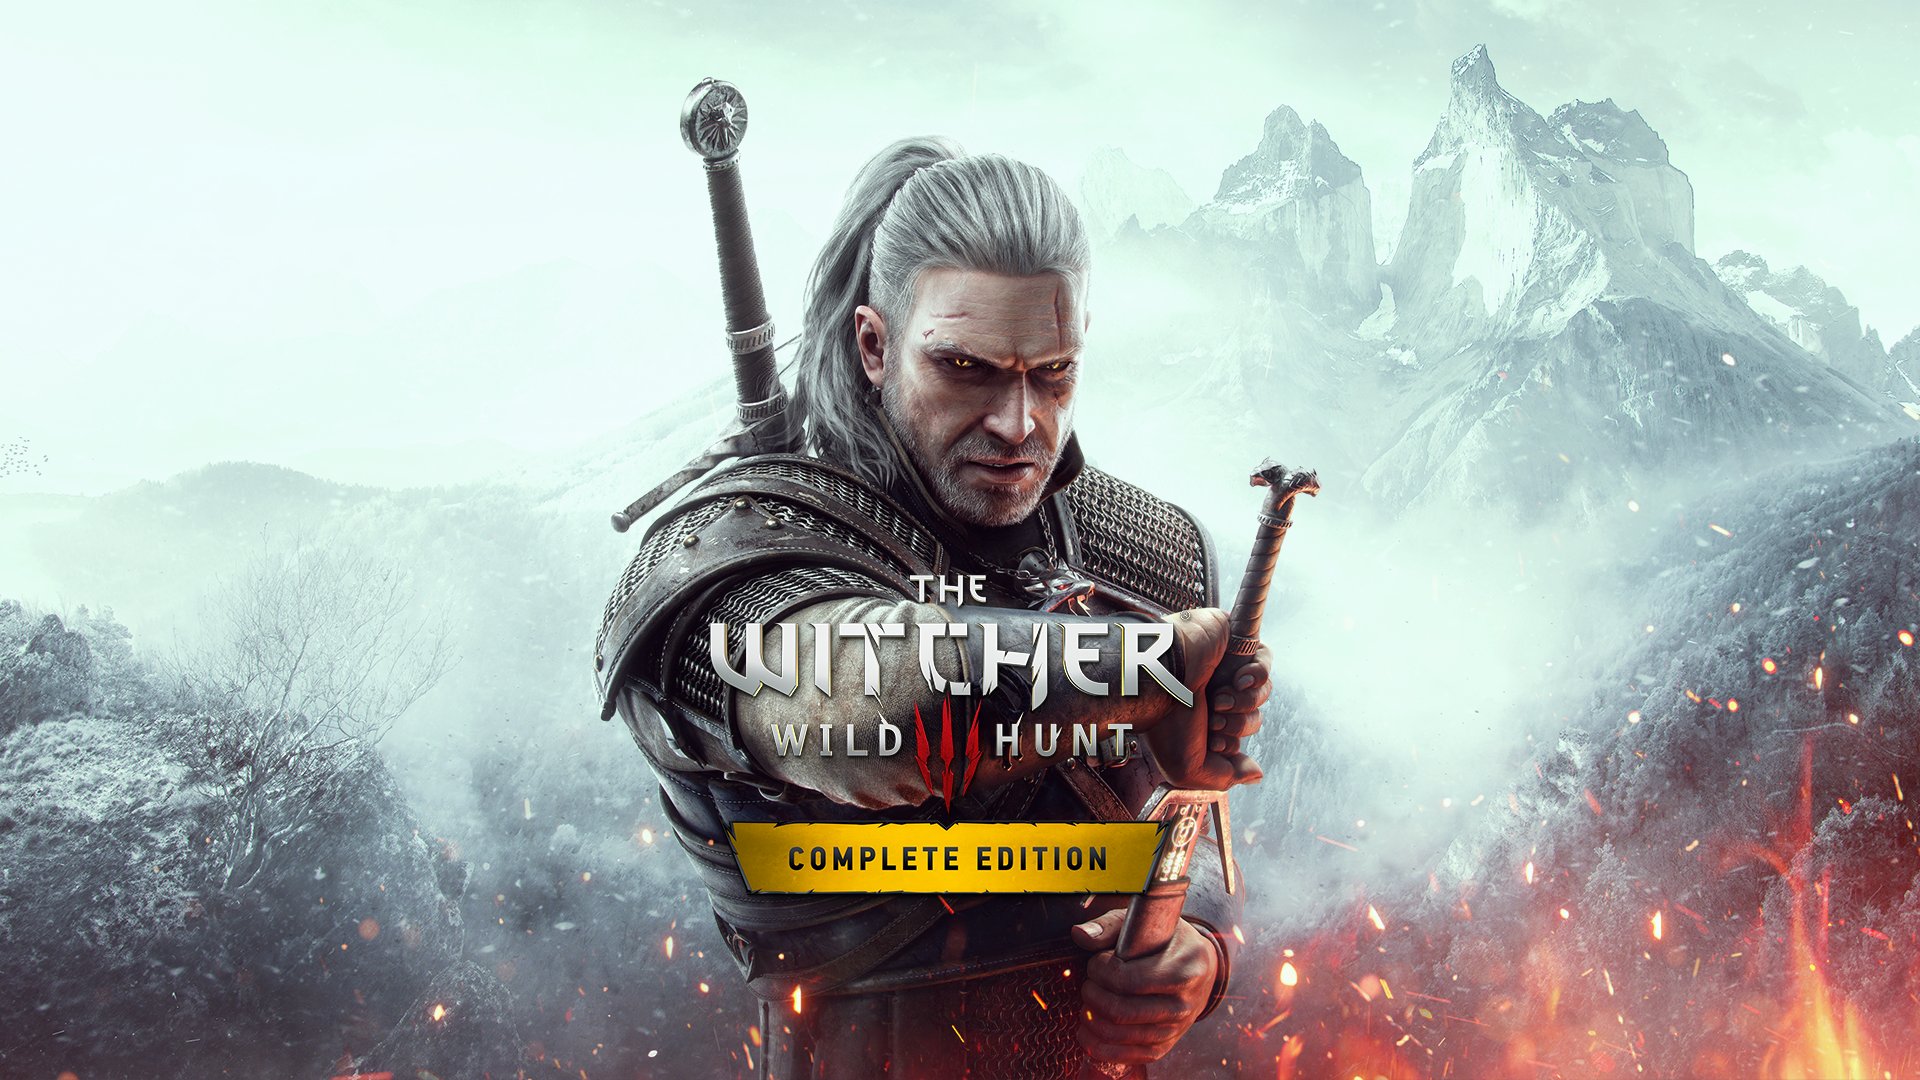 The current-gen version of 'The Witcher 3' is now slated to arrive in late 2022 - Engadget